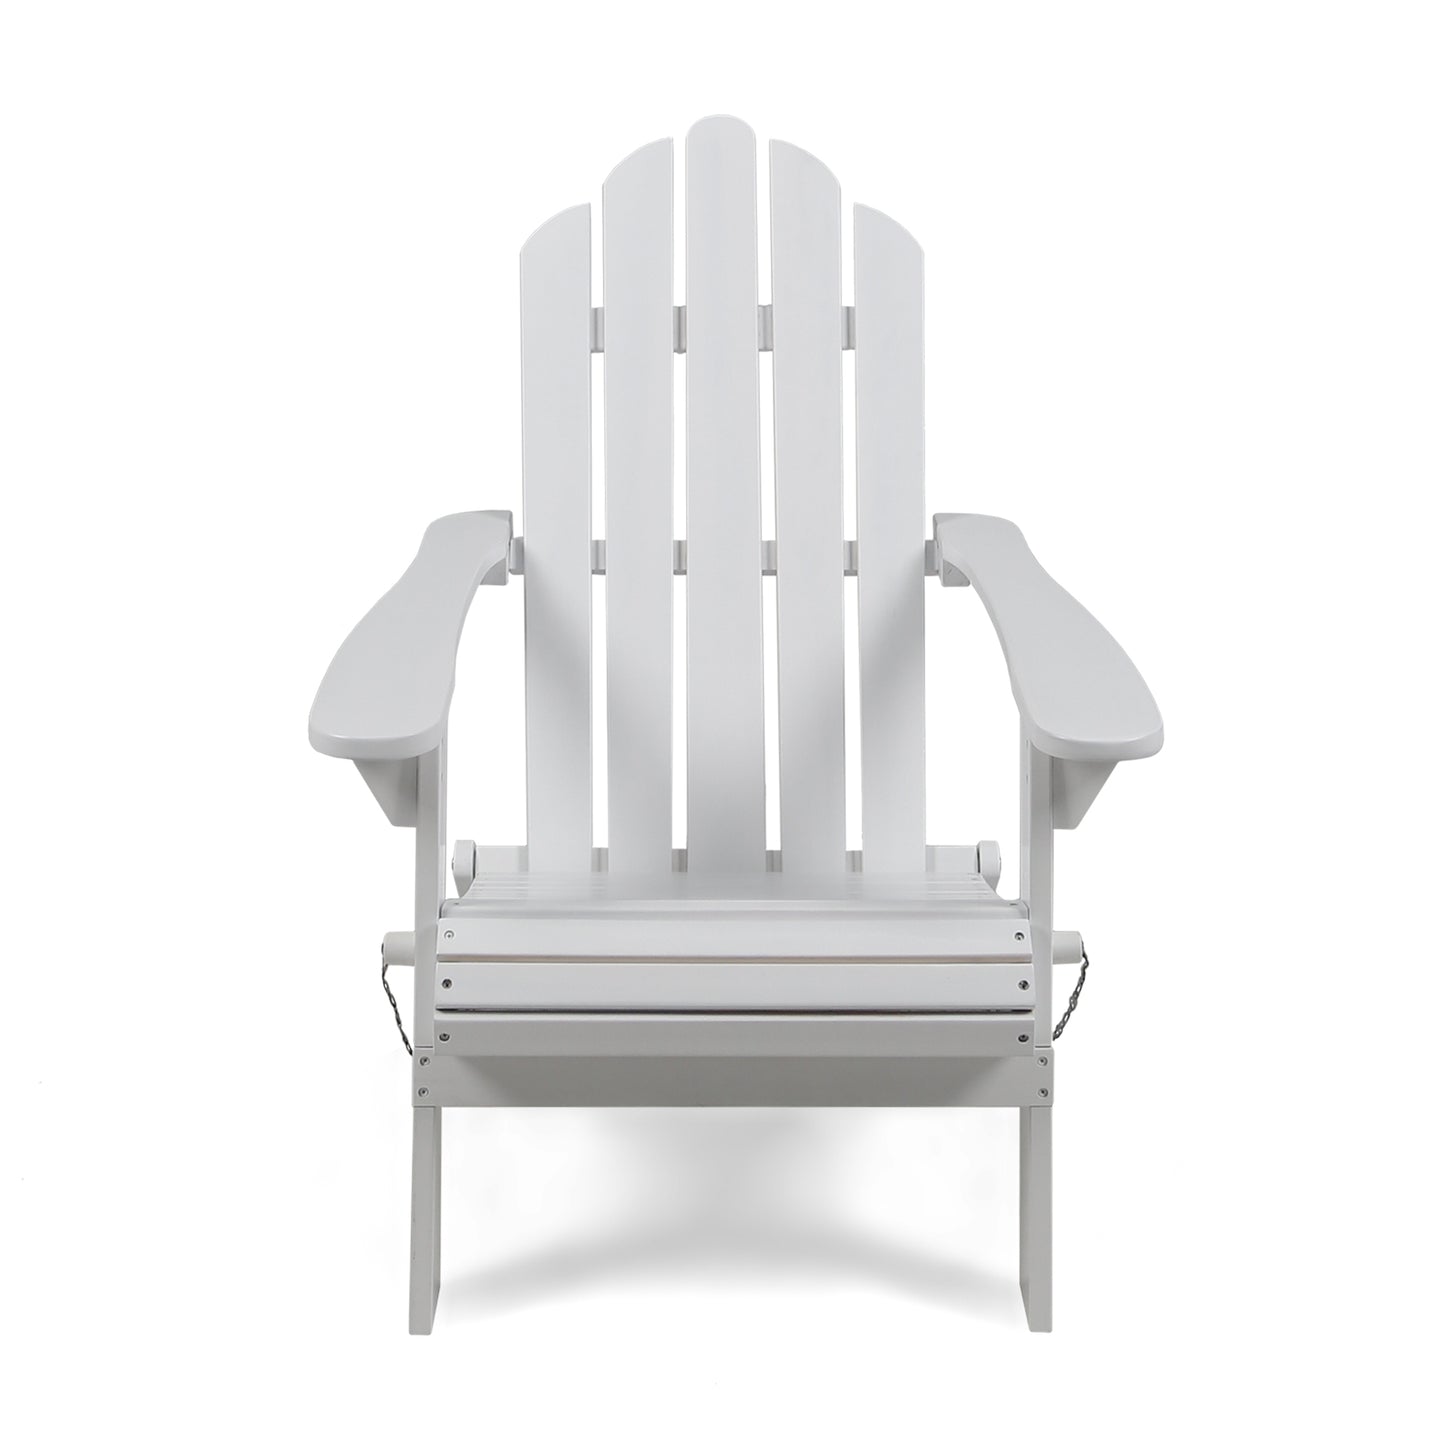 Outdoor foldable solid wood ADIRONDACK white chair